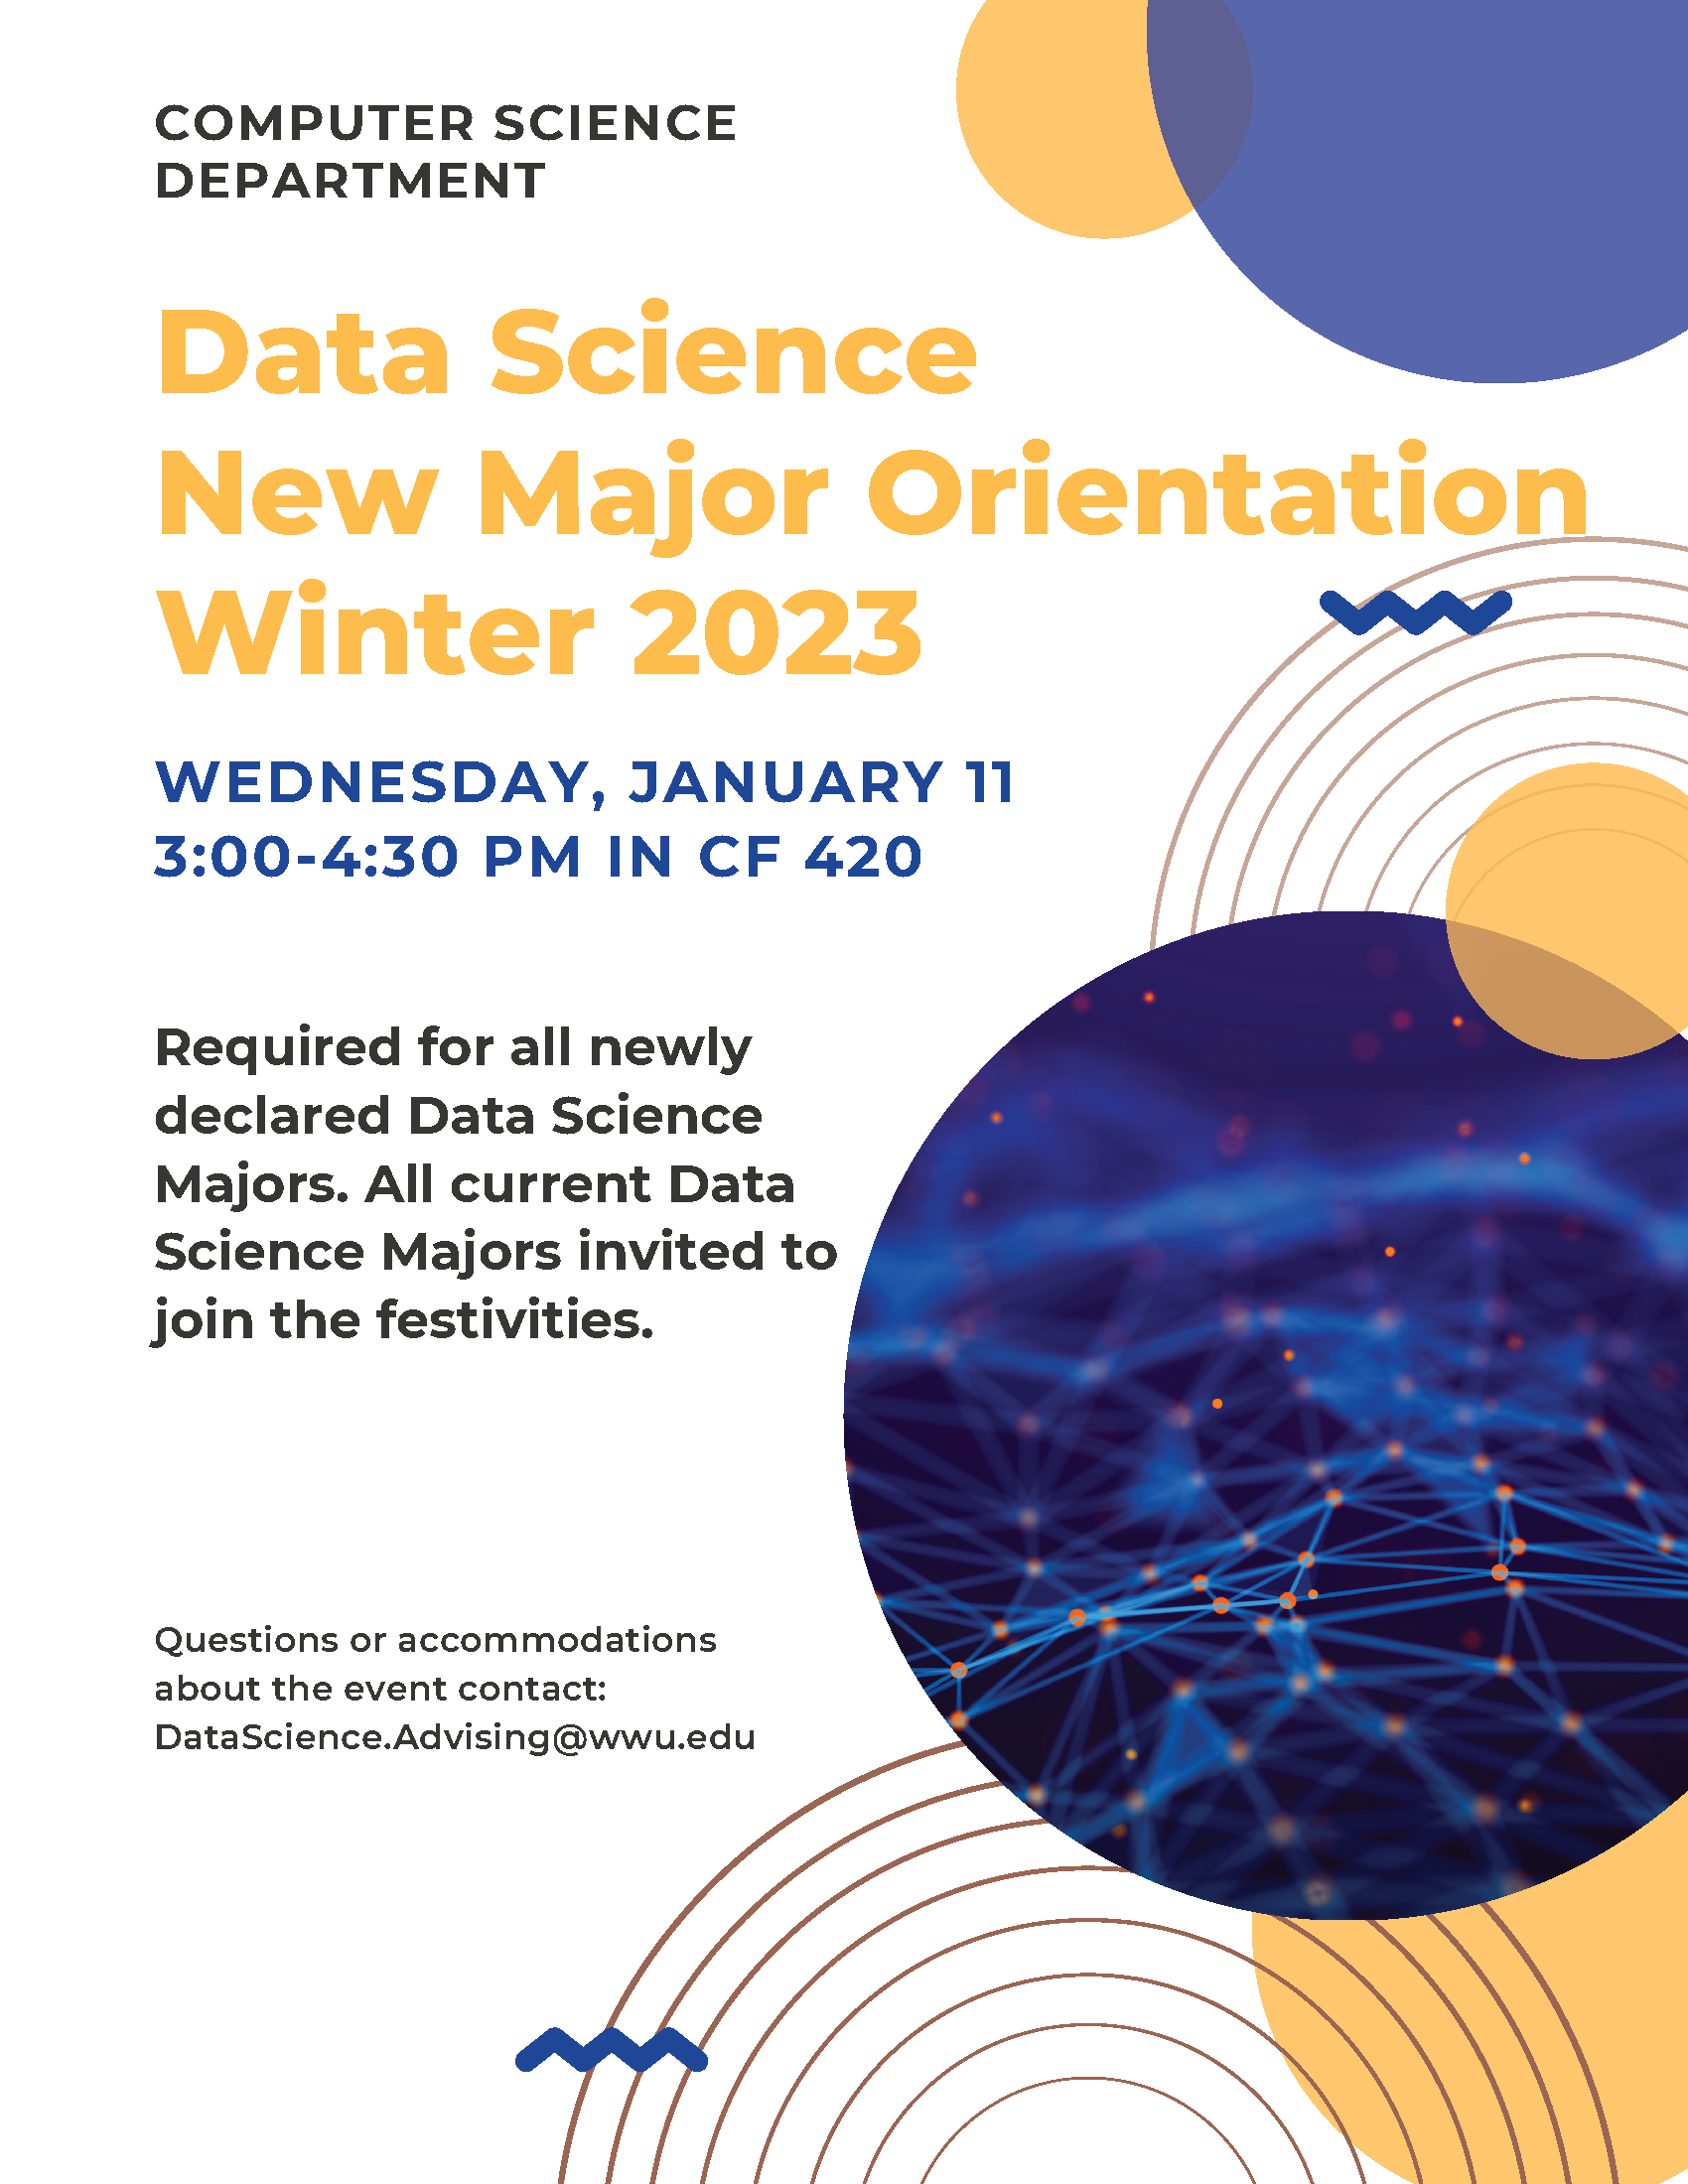 Data Science New Major Orientation - Winter 2023. Wednesday, January 11, 3:00-4:30 PM in CF 420.